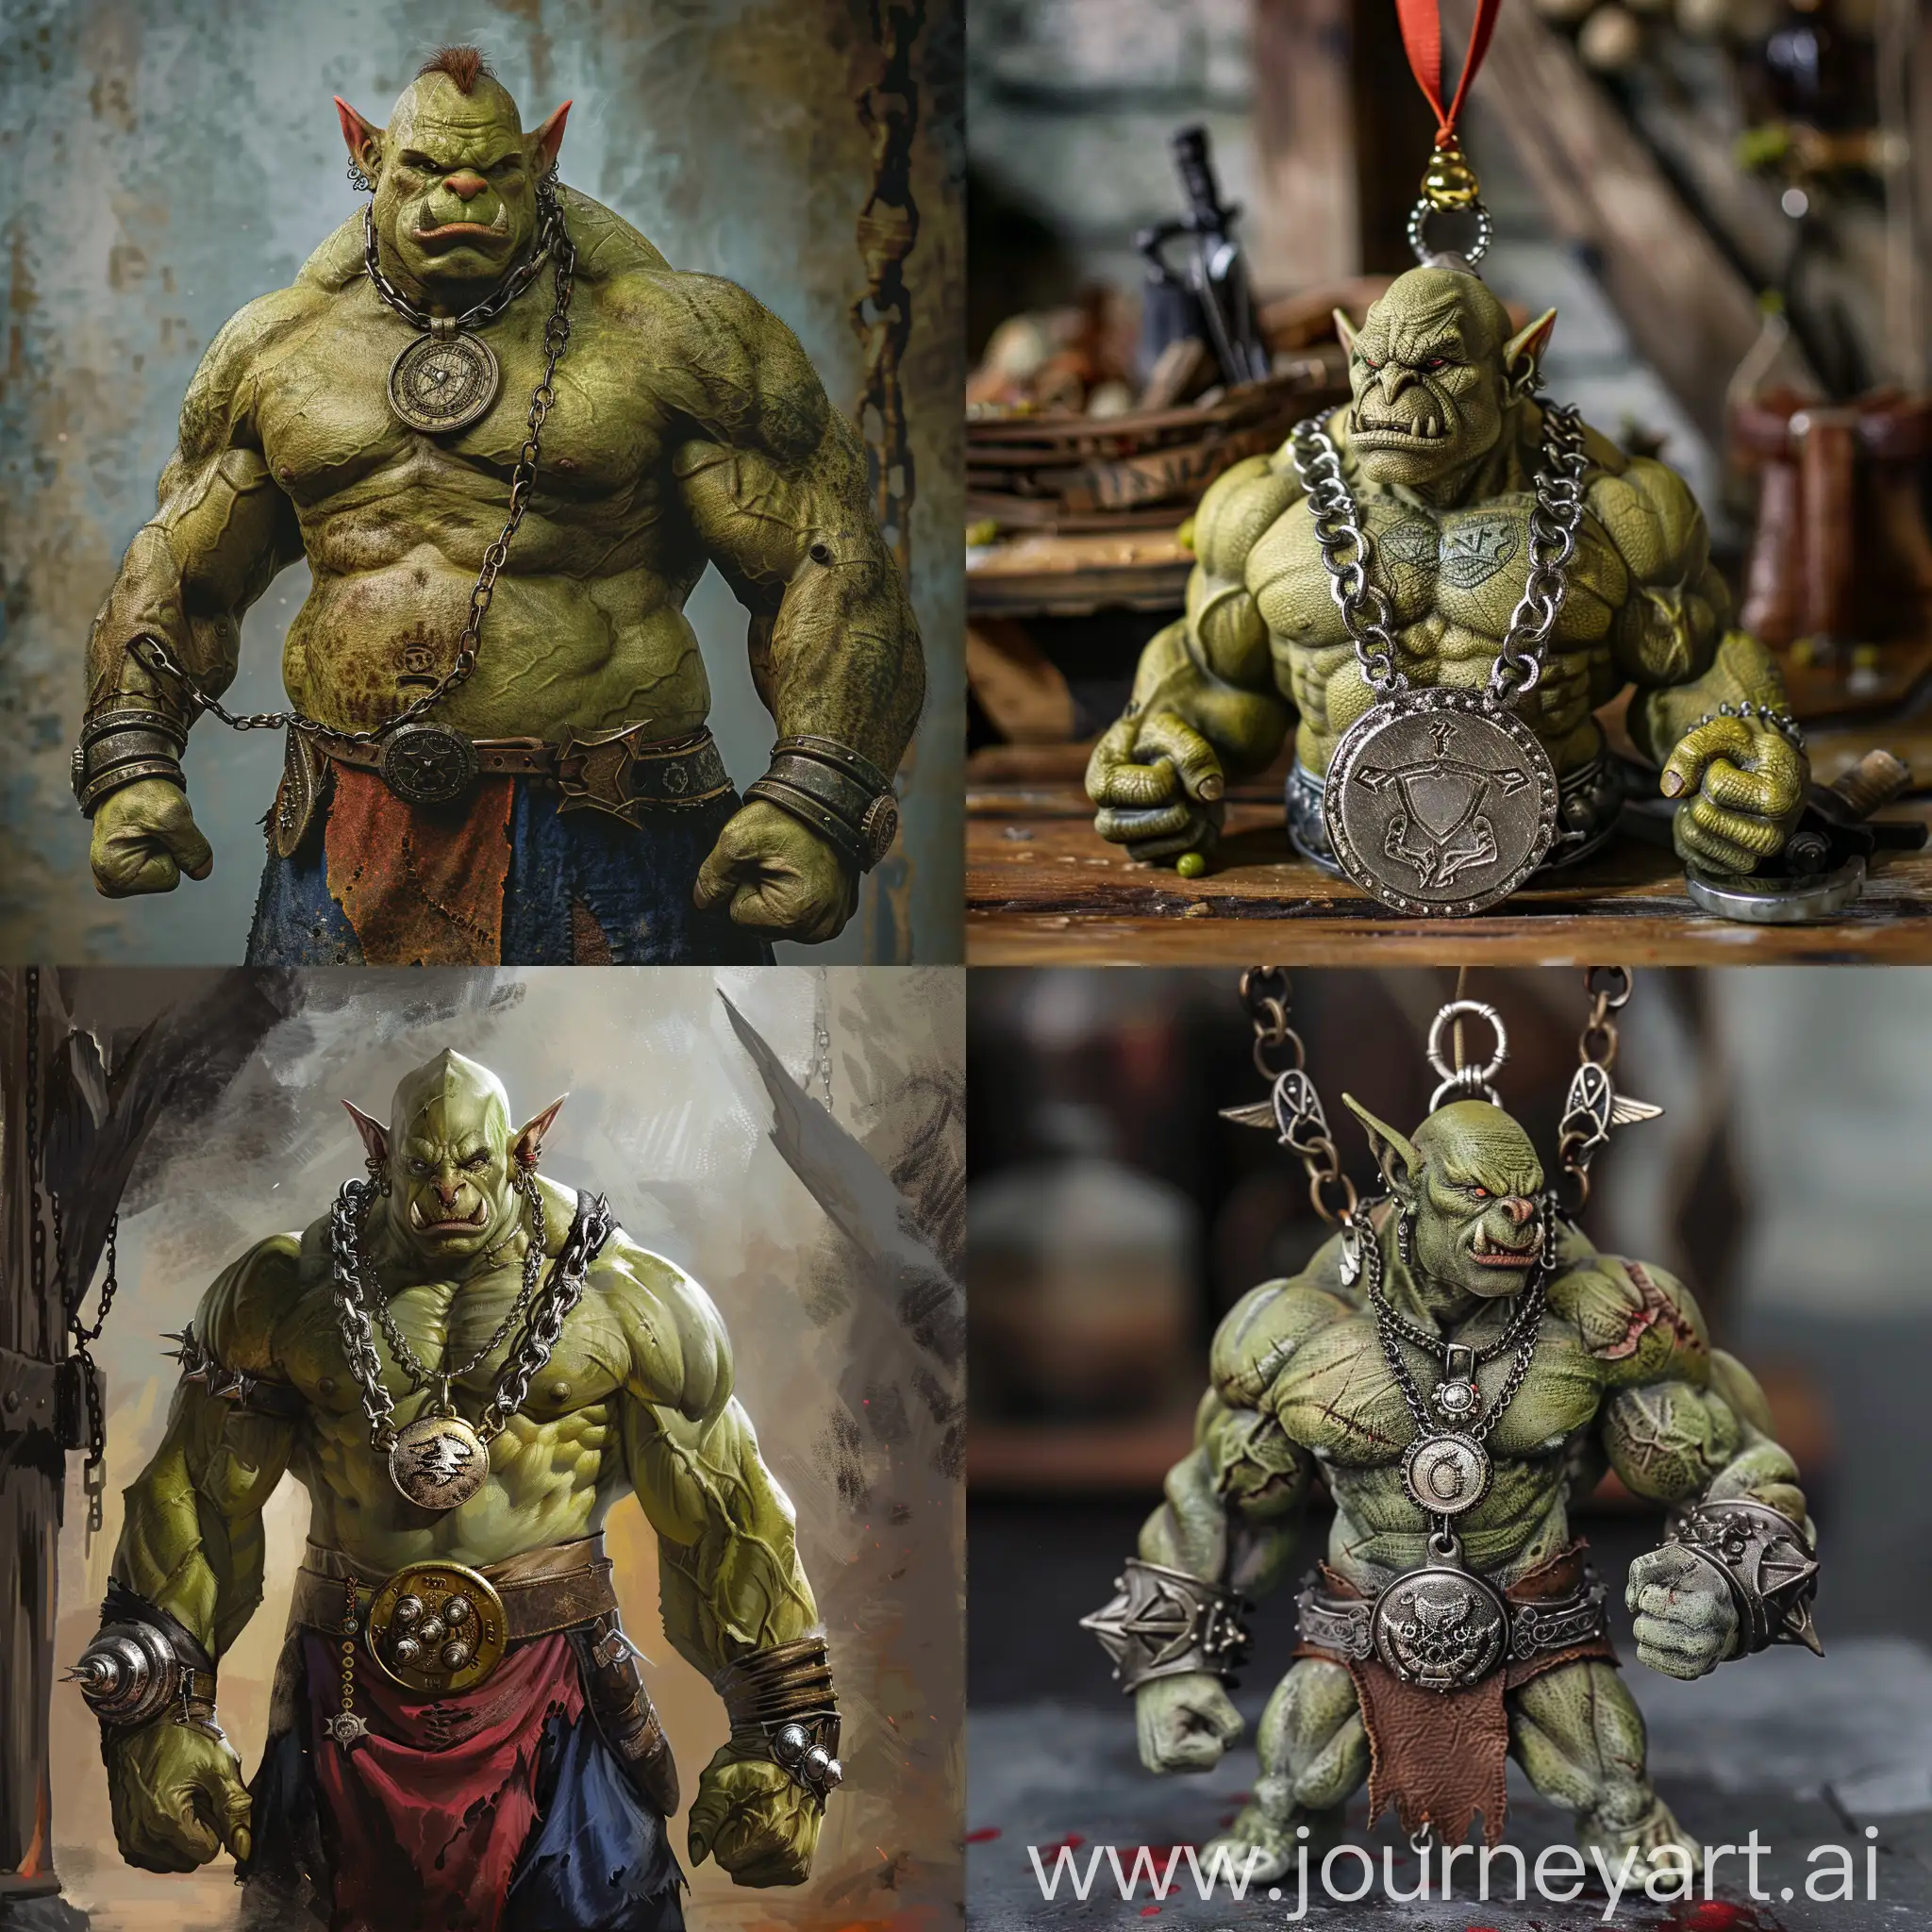 orc bodybuilder will receive a medal